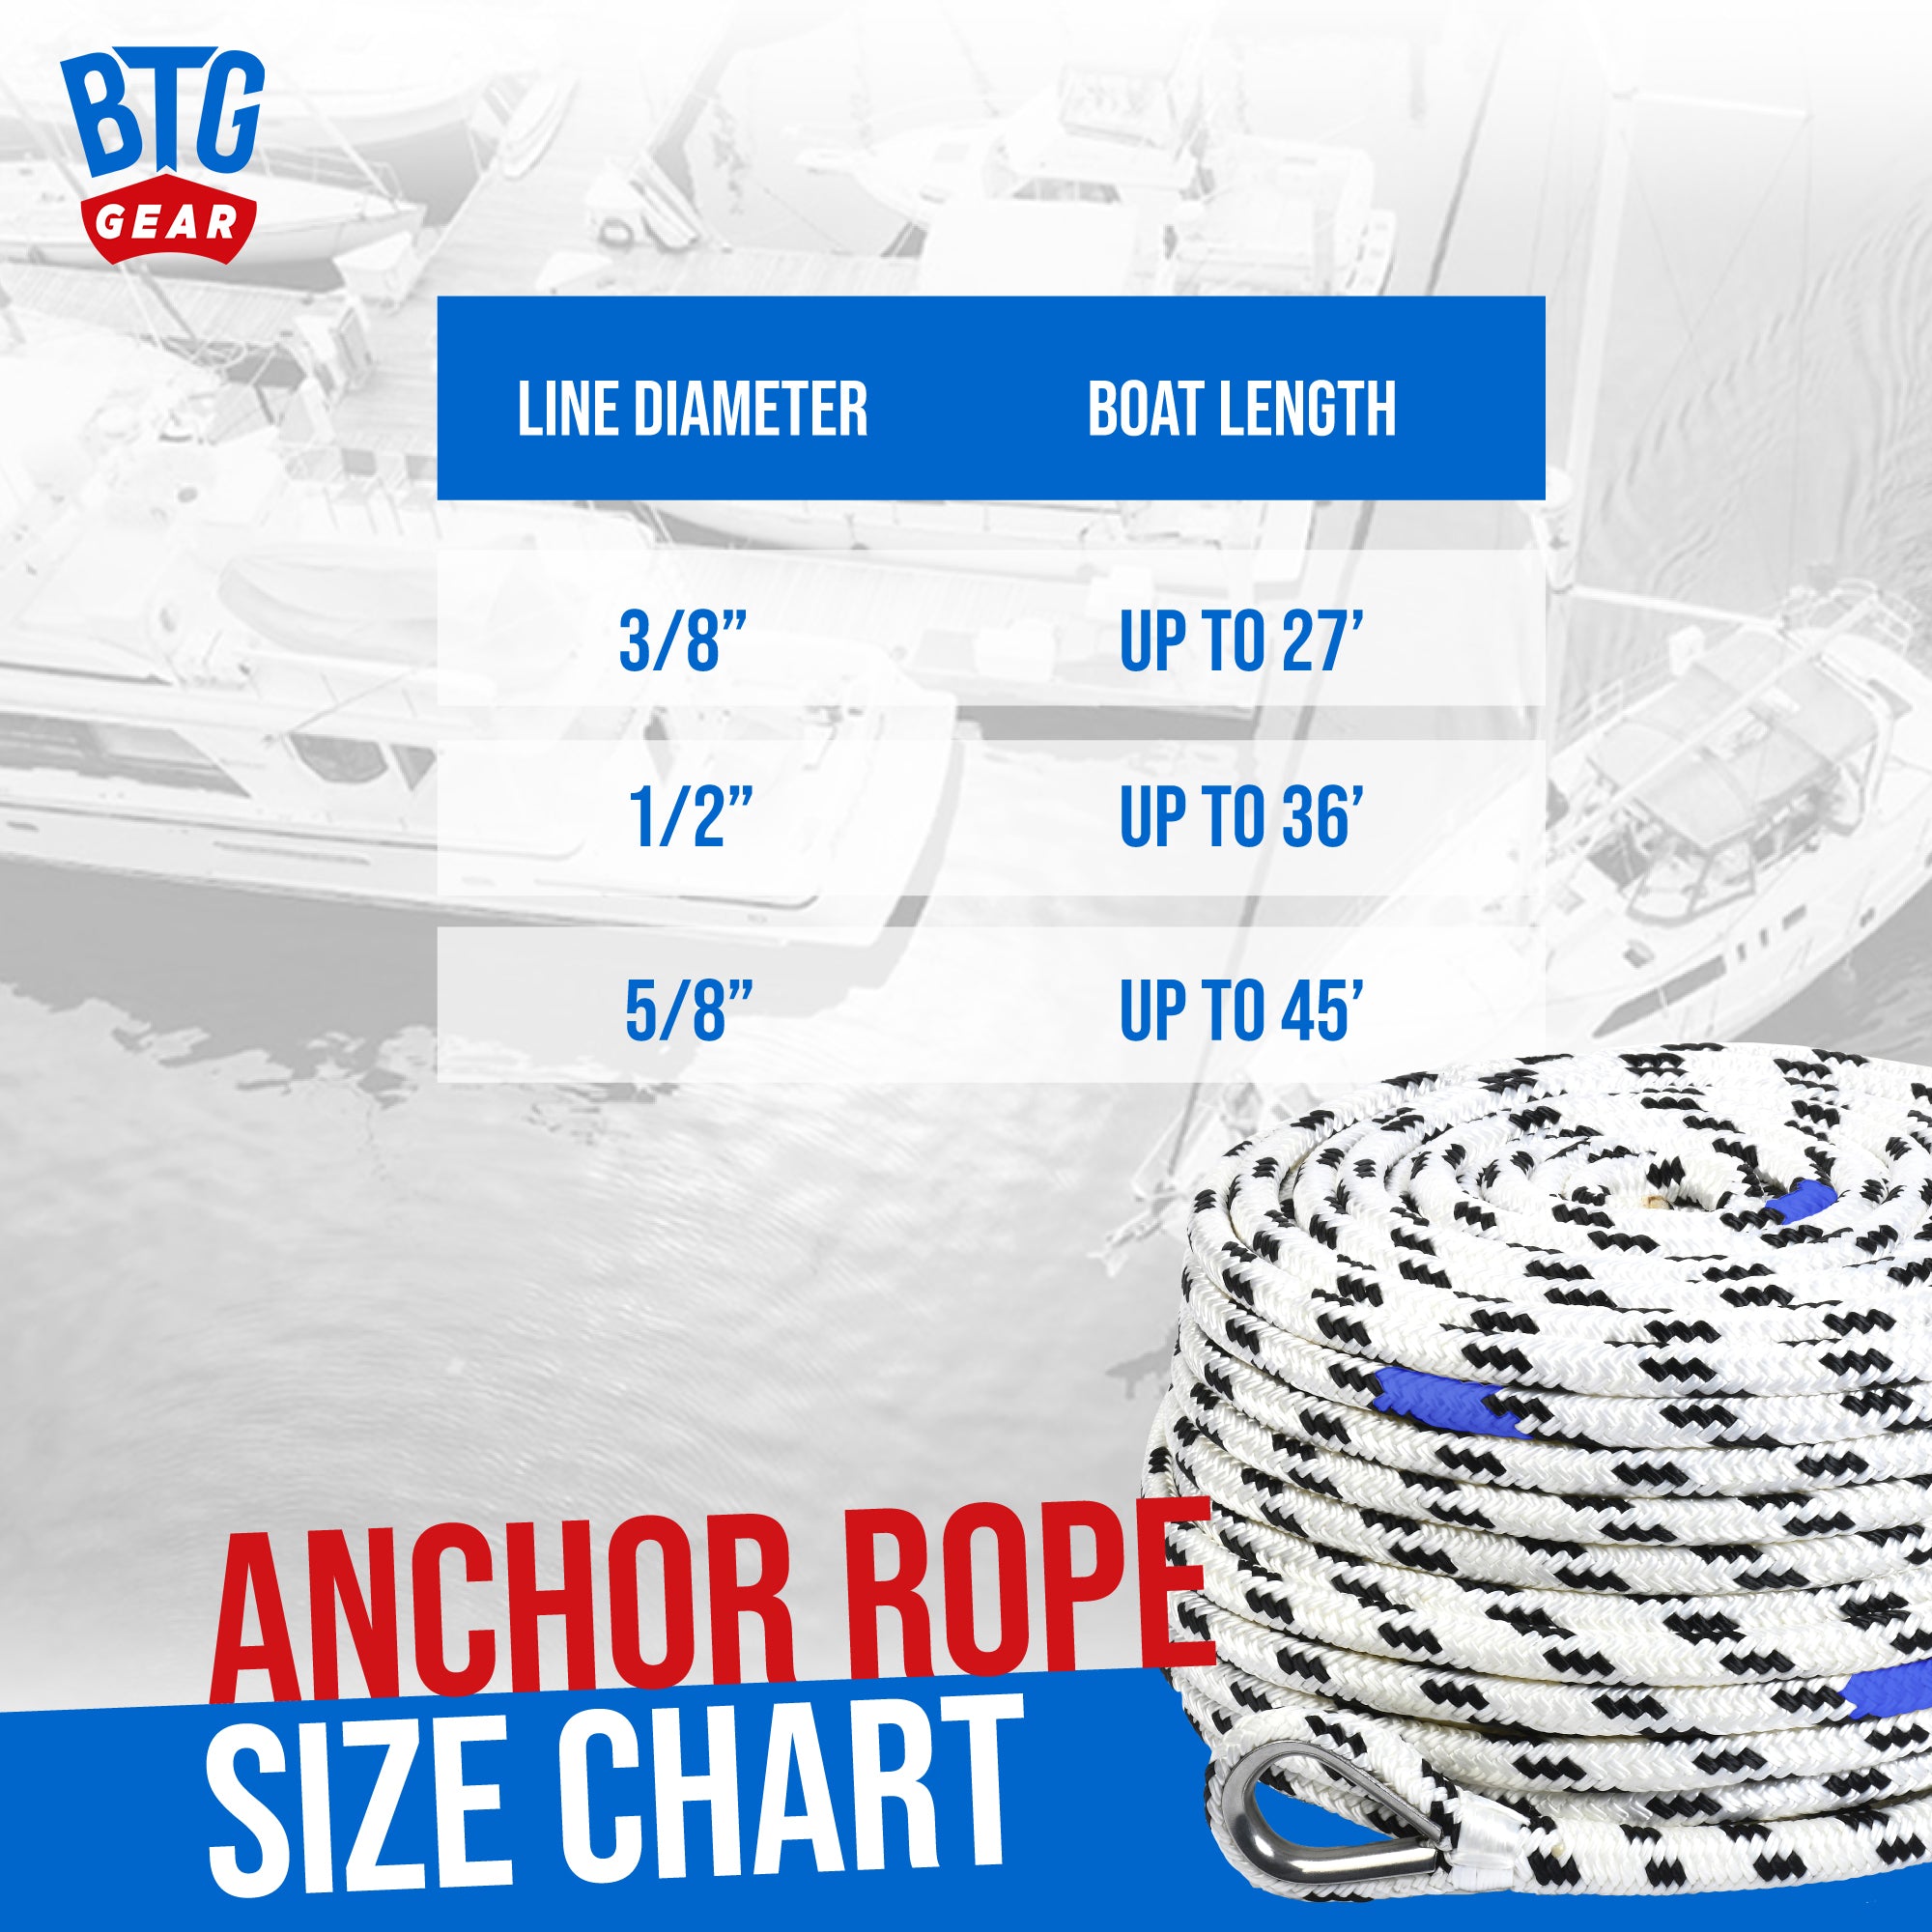 BTG Gear 200'x1/2' Marine Anchor Line/Rope w/Stainless Steel Thimble & Depth Markers, Boats Up to 36